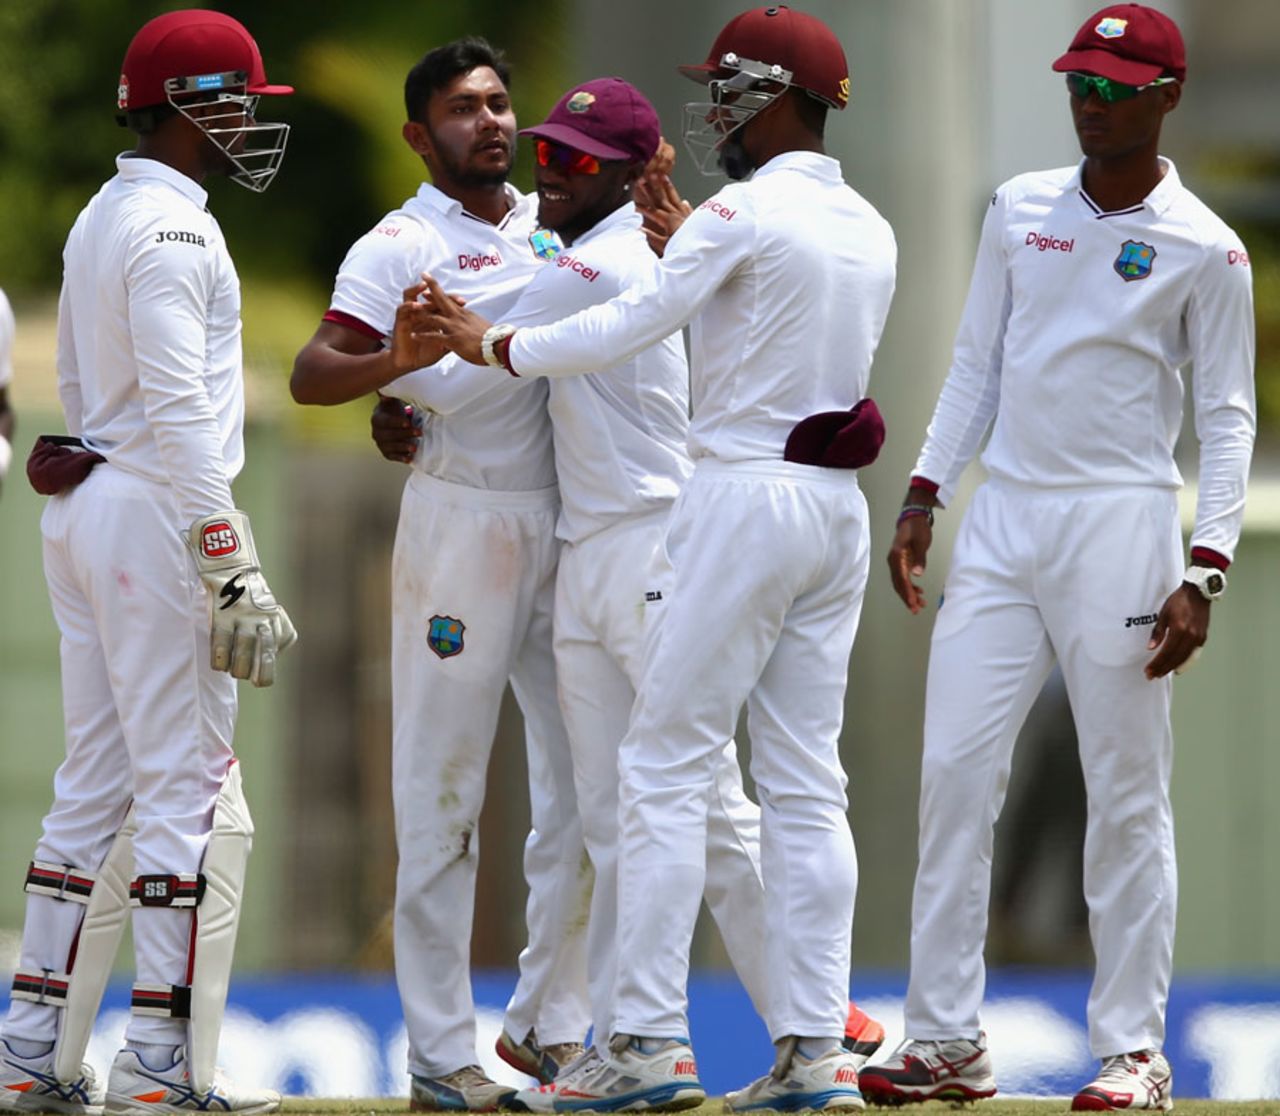 Devendra Bishoo is congratulated after dismissing Brad Haddin, West Indies v Australia, 1st Test, Roseau, 2nd day, June 4, 2015